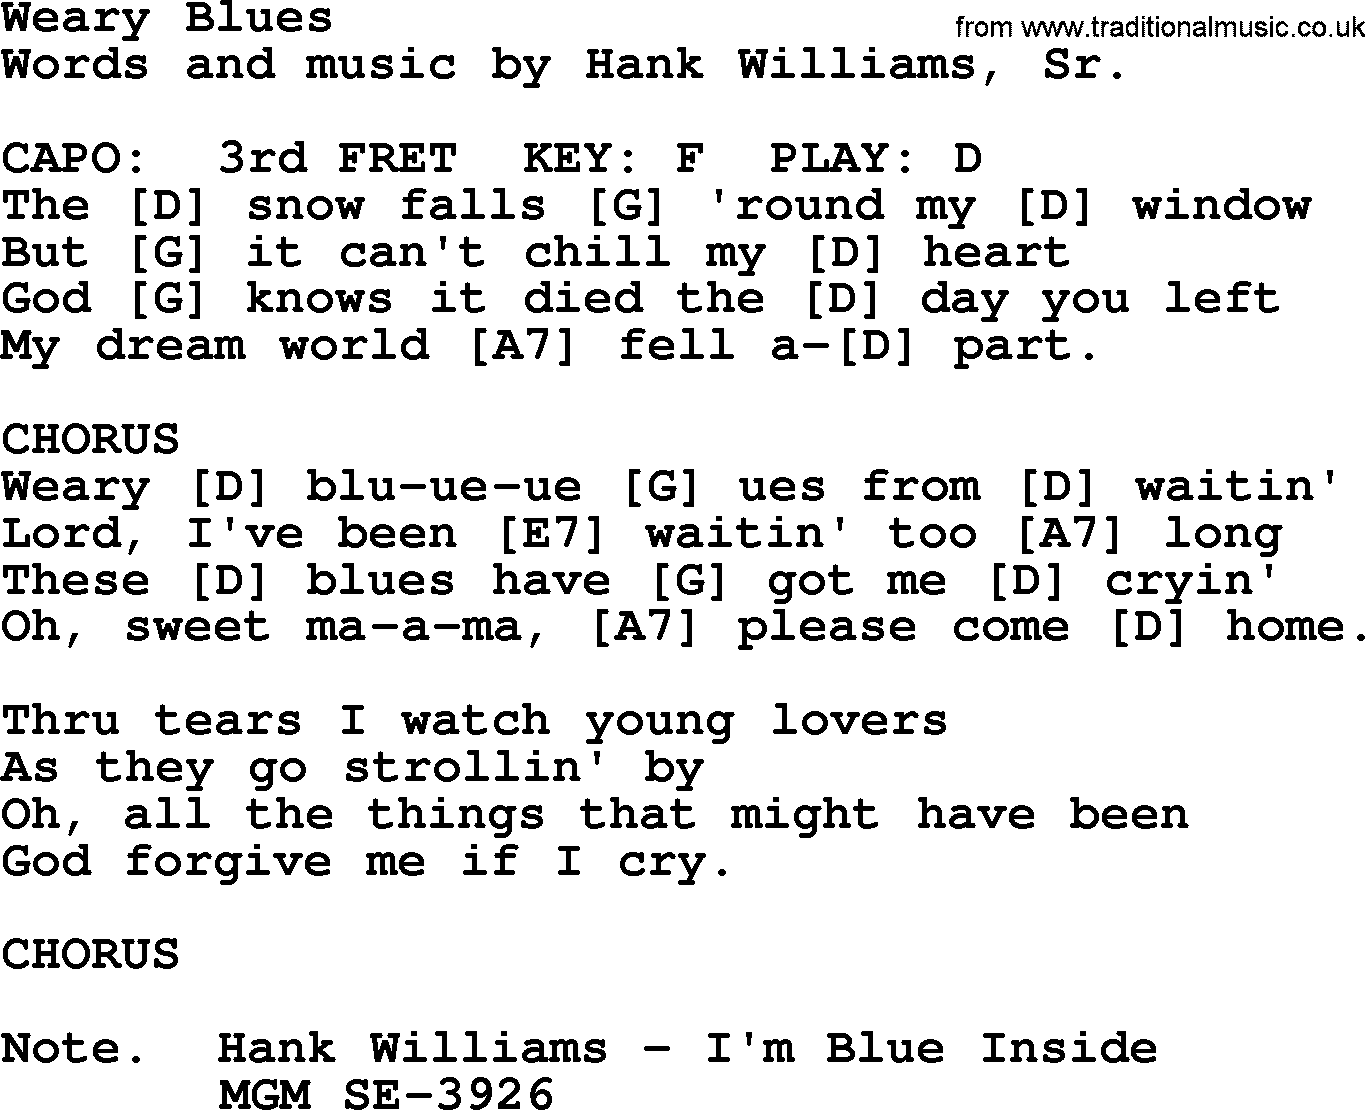 Hank Williams song Weary Blues, lyrics and chords